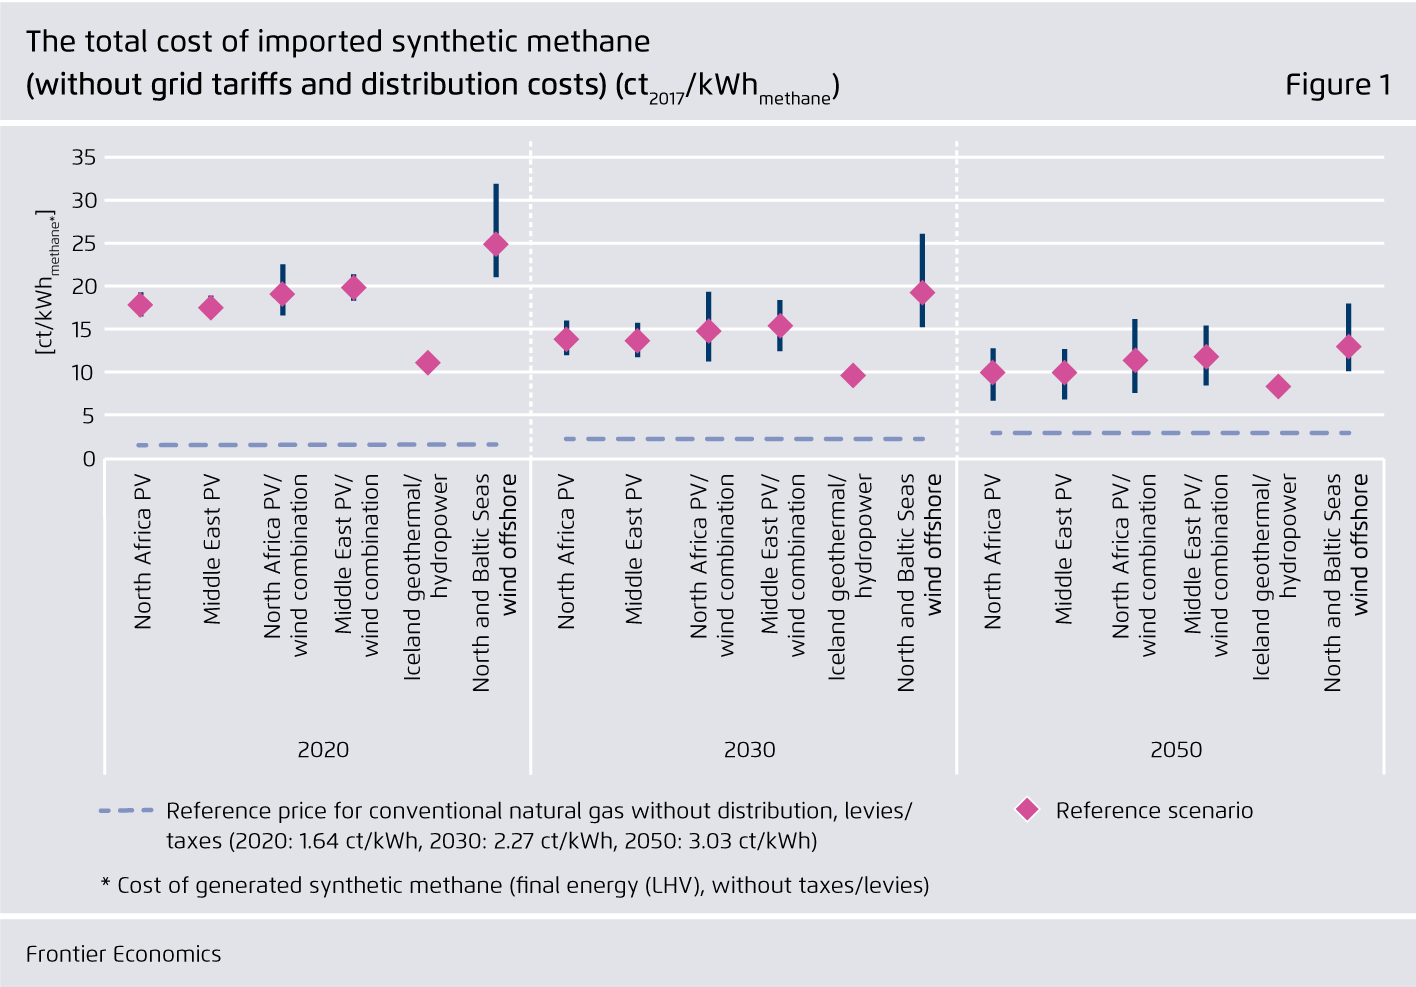 Preview for The total cost of imported synthetic methane (without grid tariffs and distribution costs) (ct2017/kWhmethane)